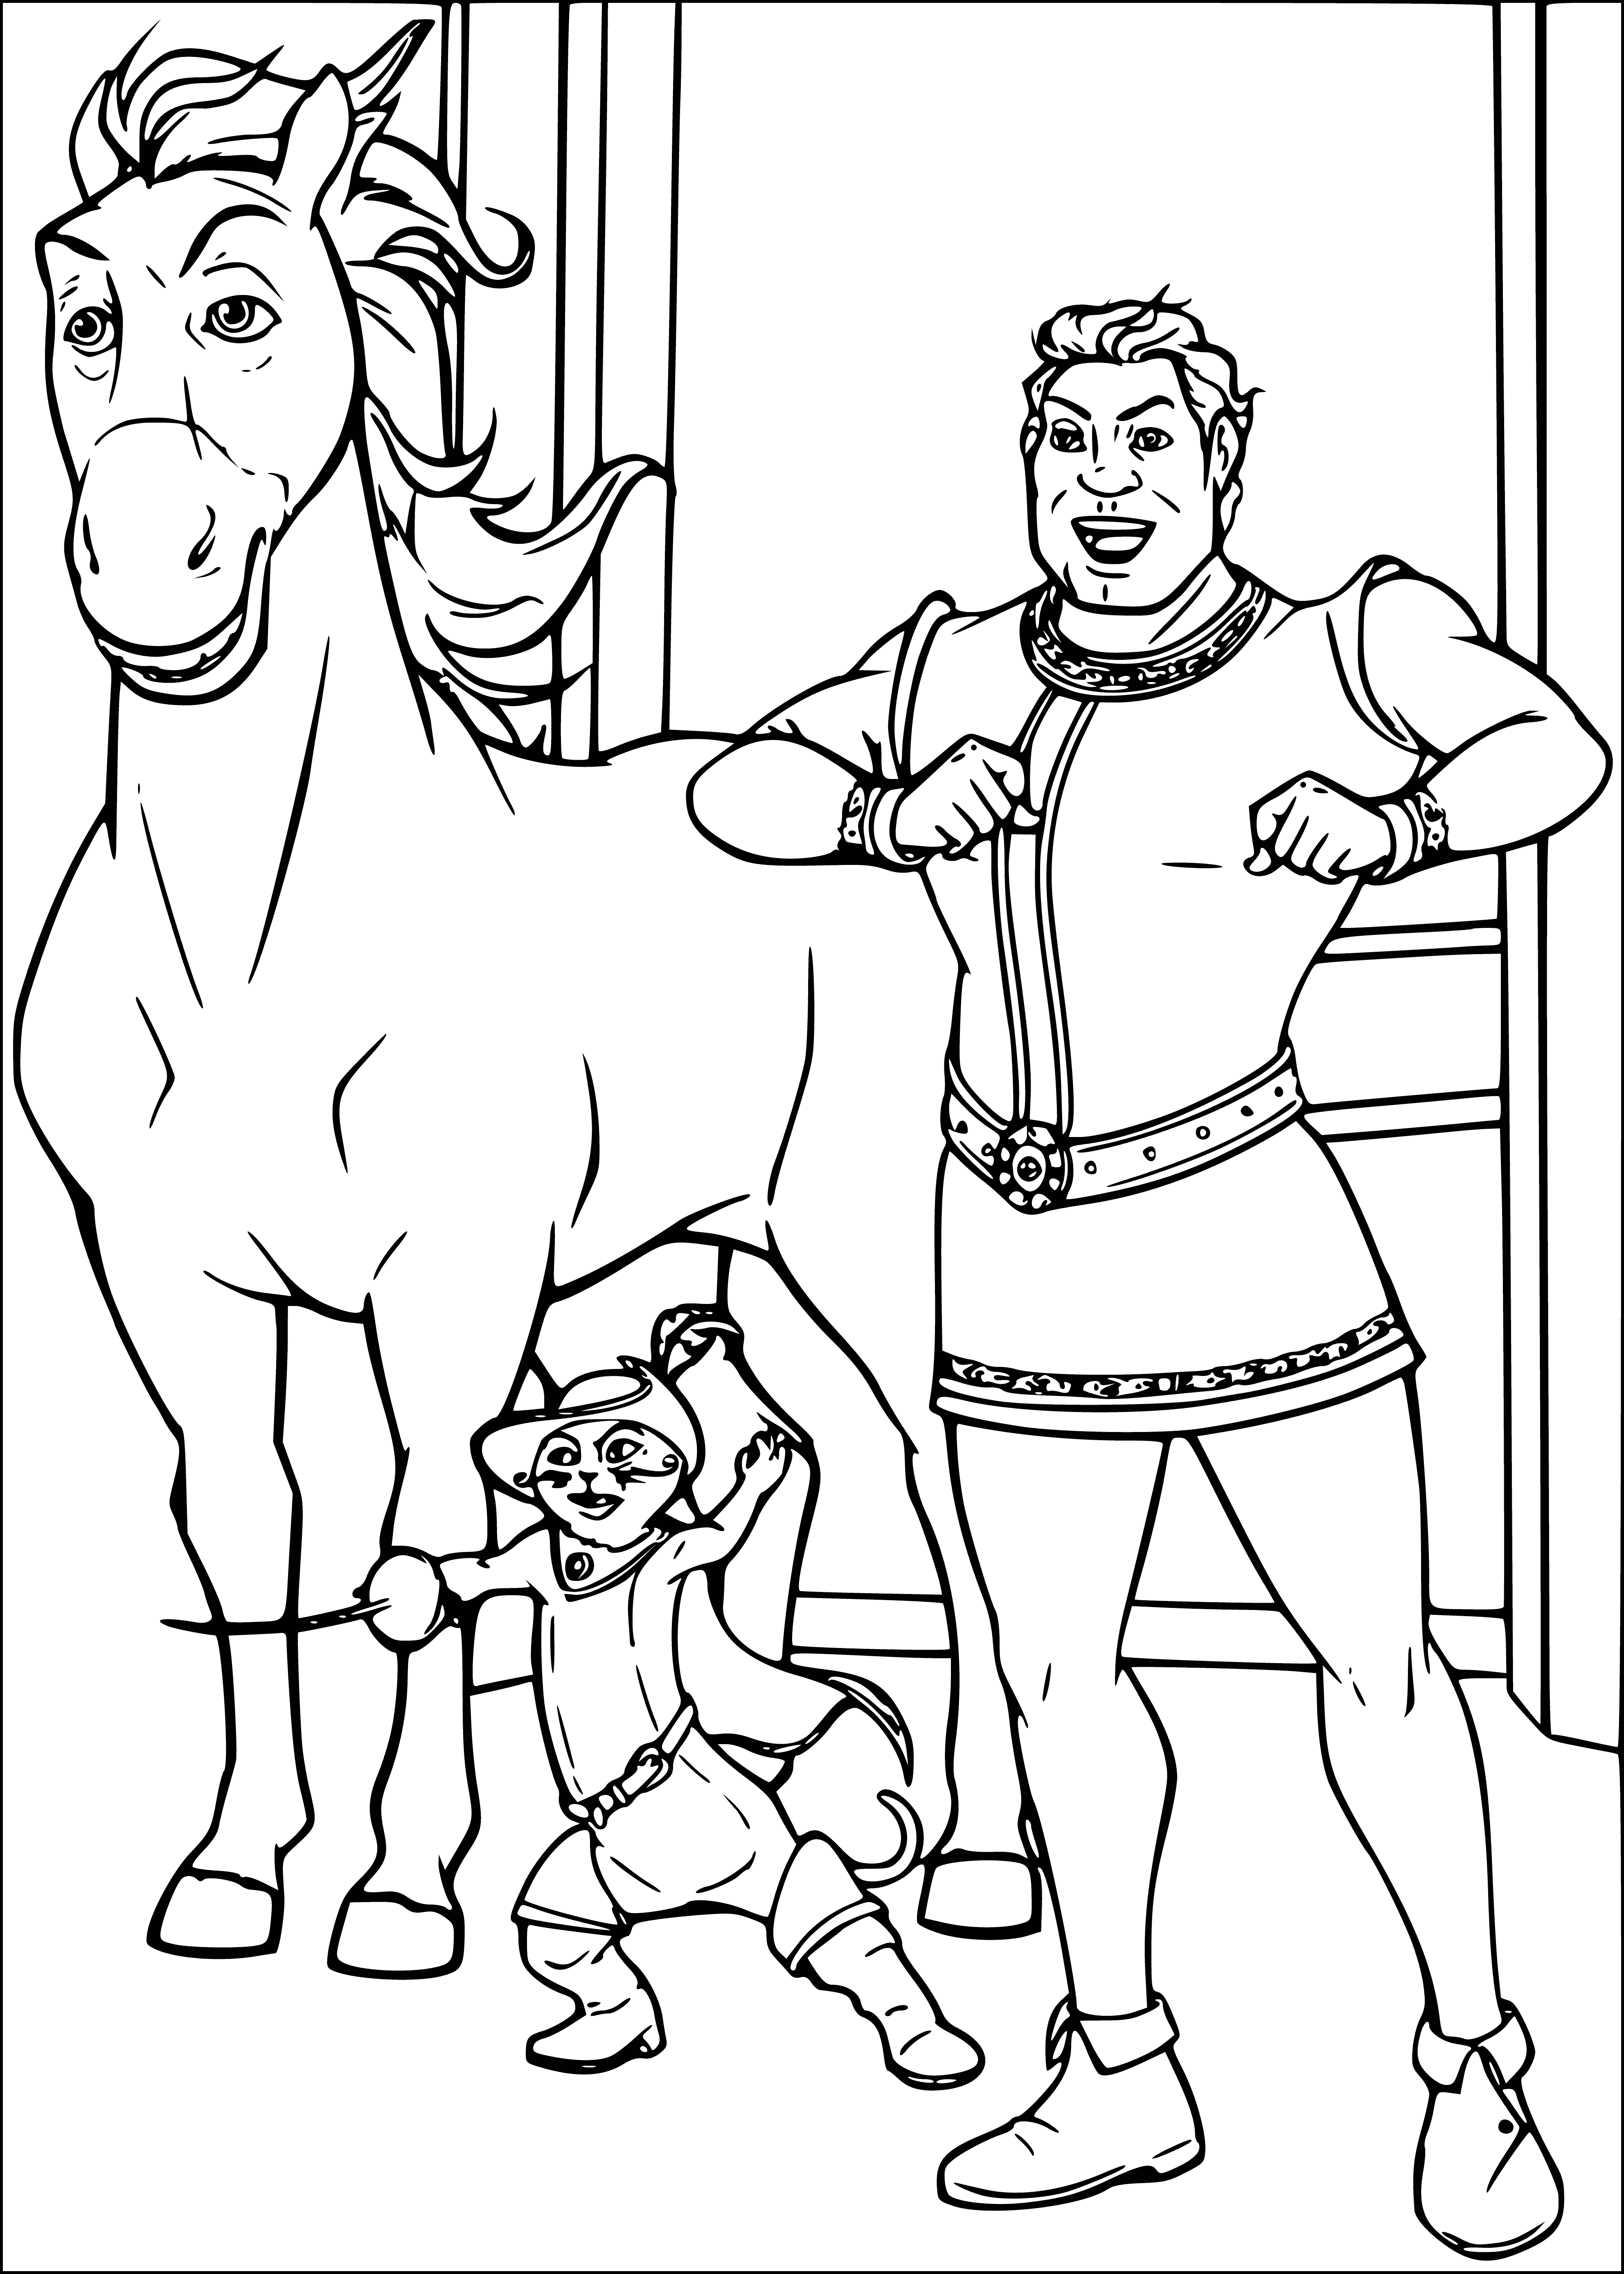 Heroes inside the castle coloring page